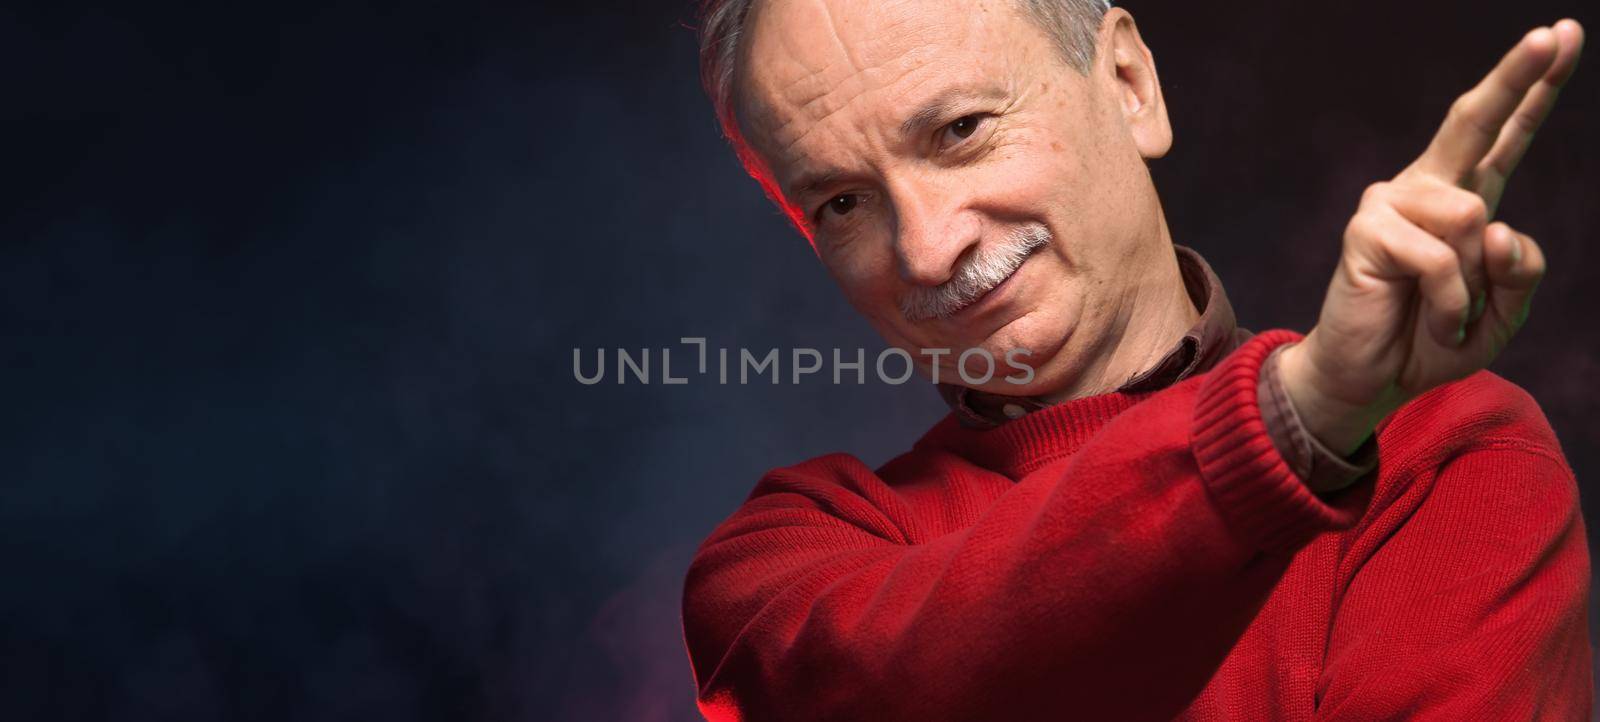 Close-up portrait of an elderly man gesturing at a blurred background